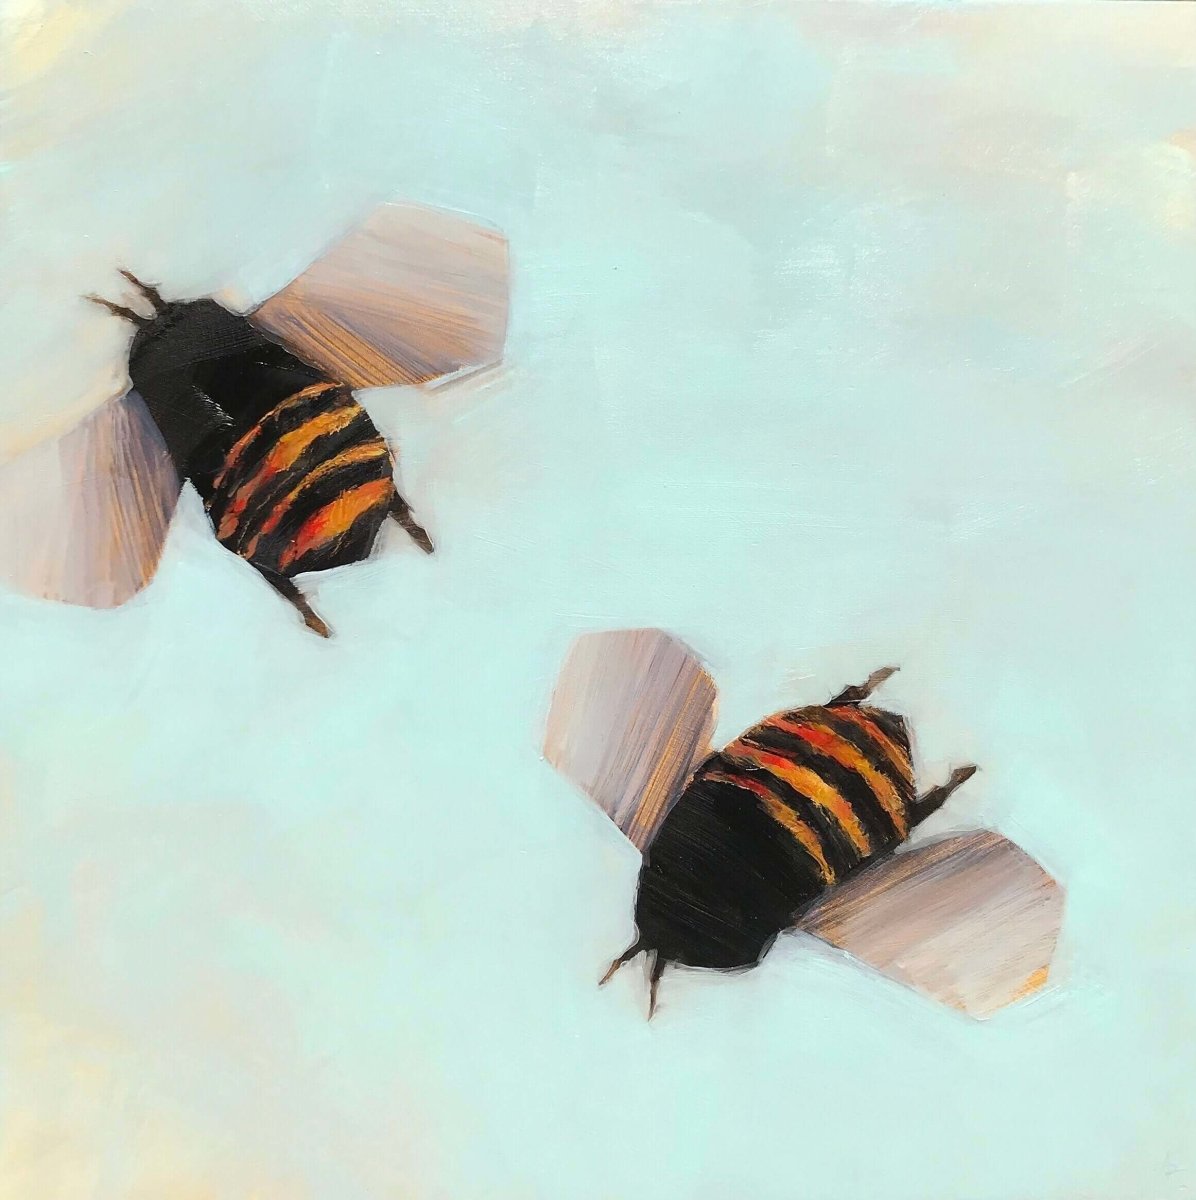 Bees 2-34 by Angie Renfro at LePrince Galleries